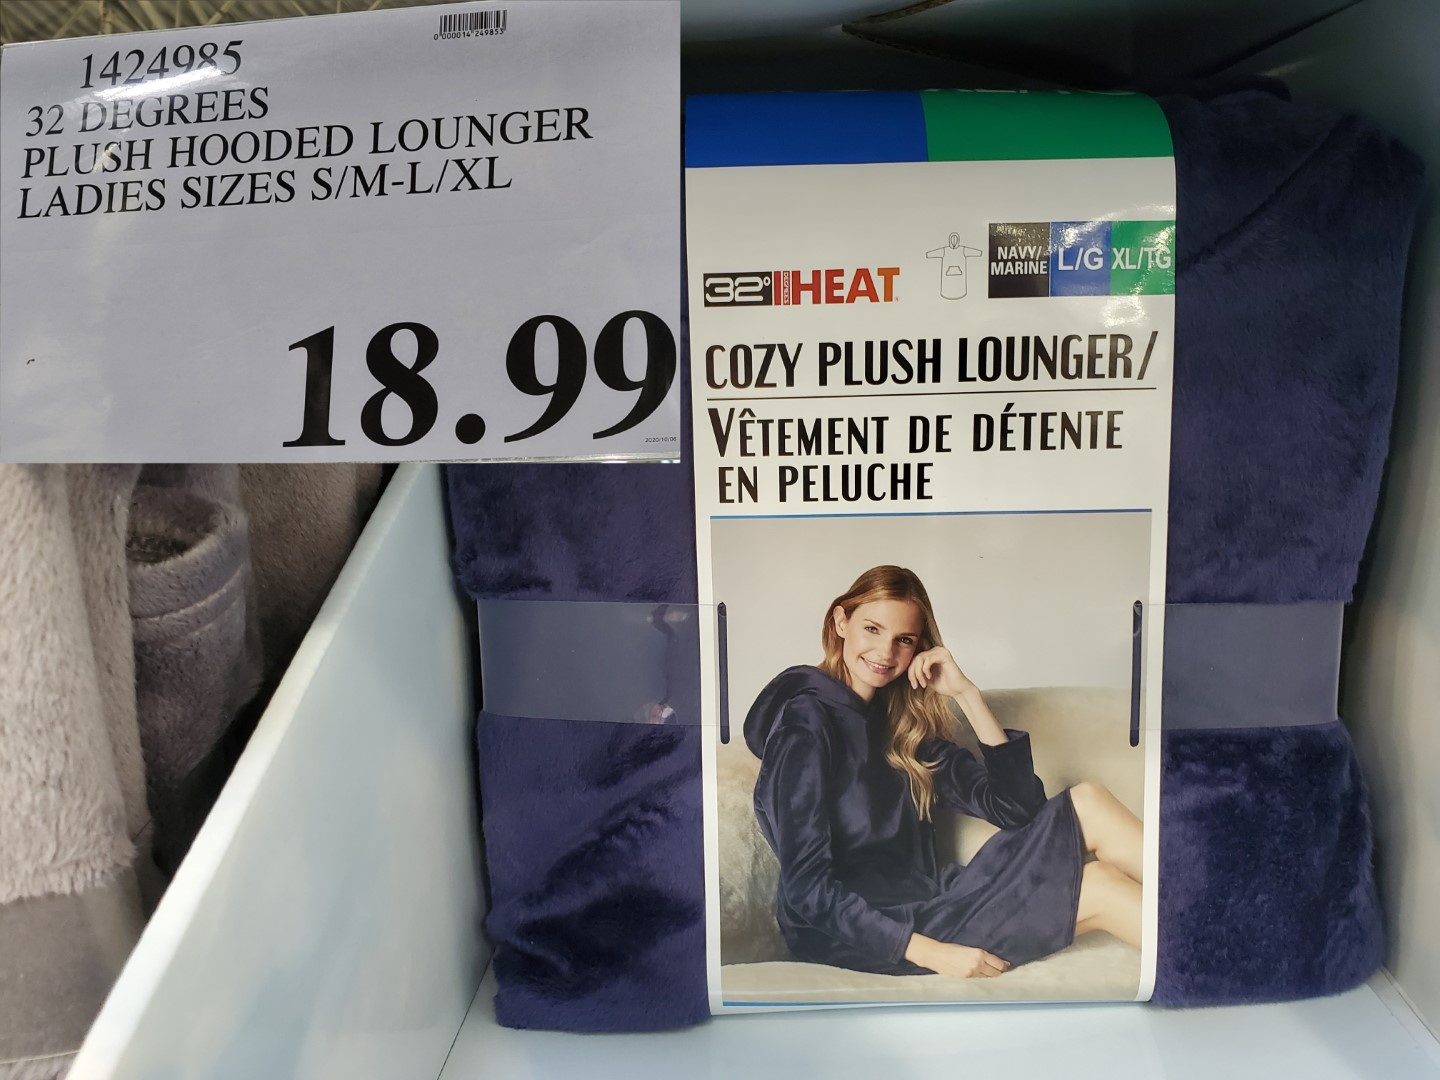 🌡️32 Degrees Ladies' Hooded Lounger on clearance now on Costco